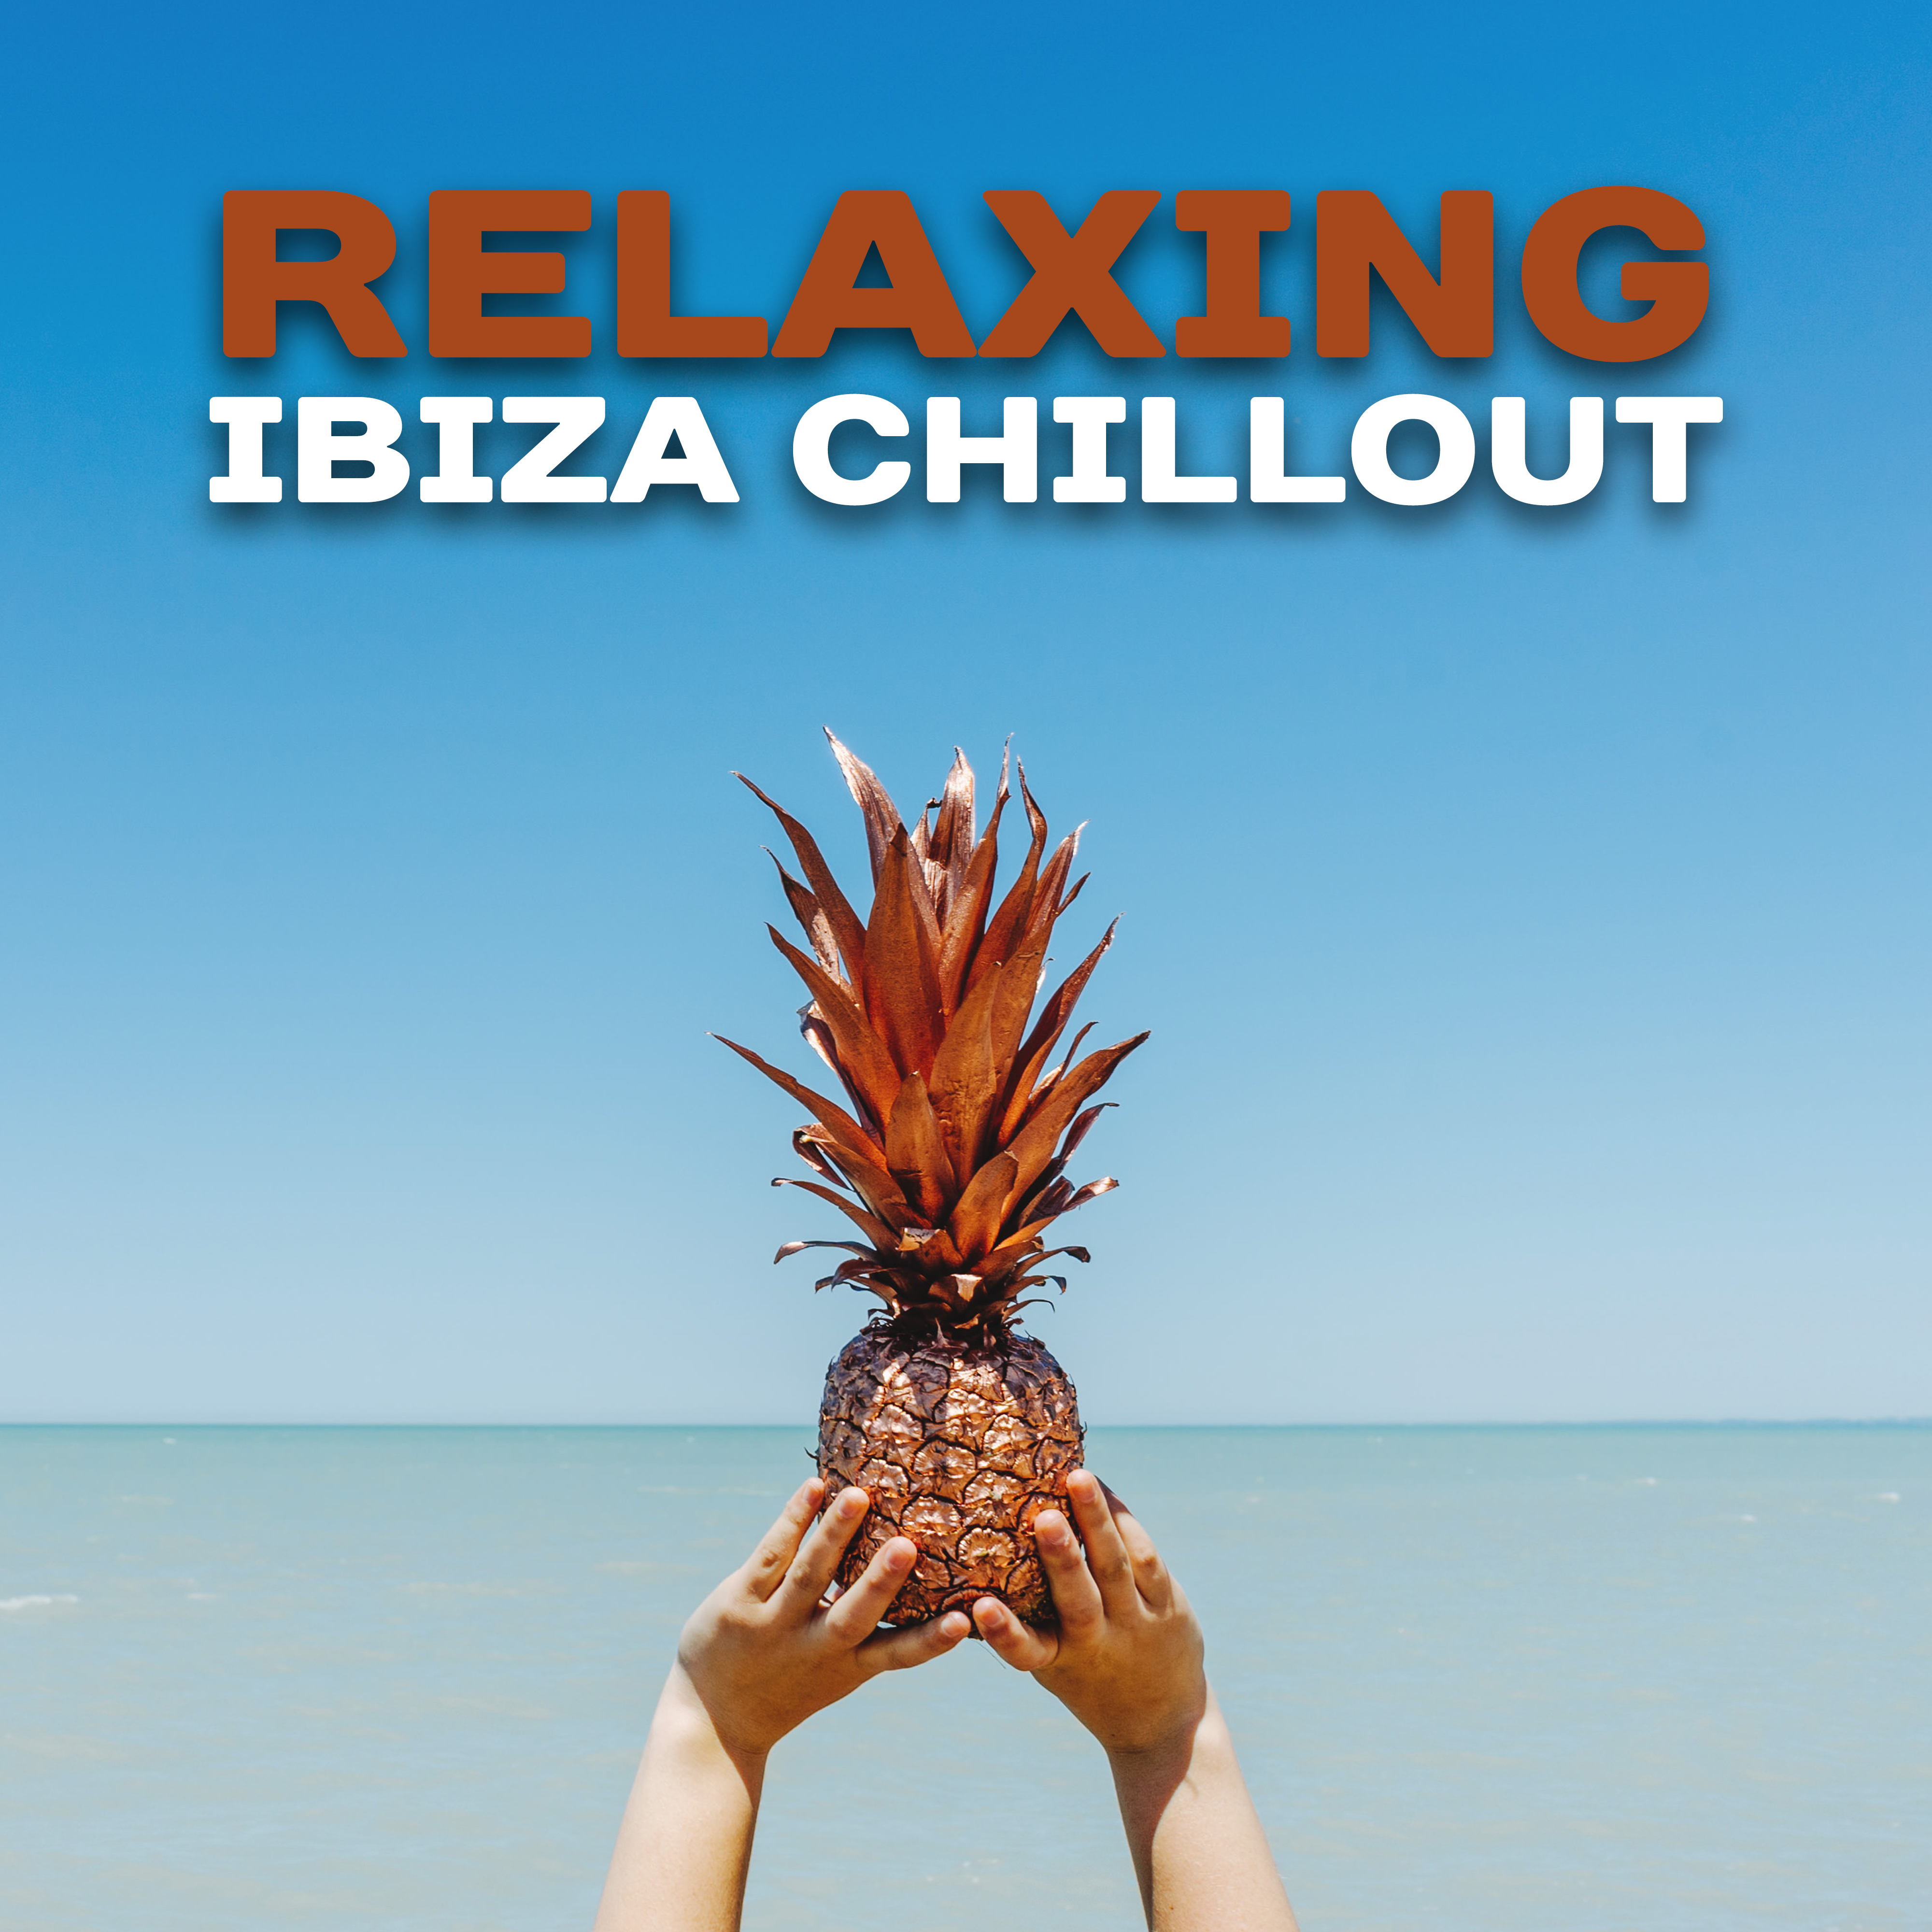 Relaxing Ibiza Chillout  Soft Chill Out Music, Ibiza Relaxation, Summer Rest, Beach Lounge